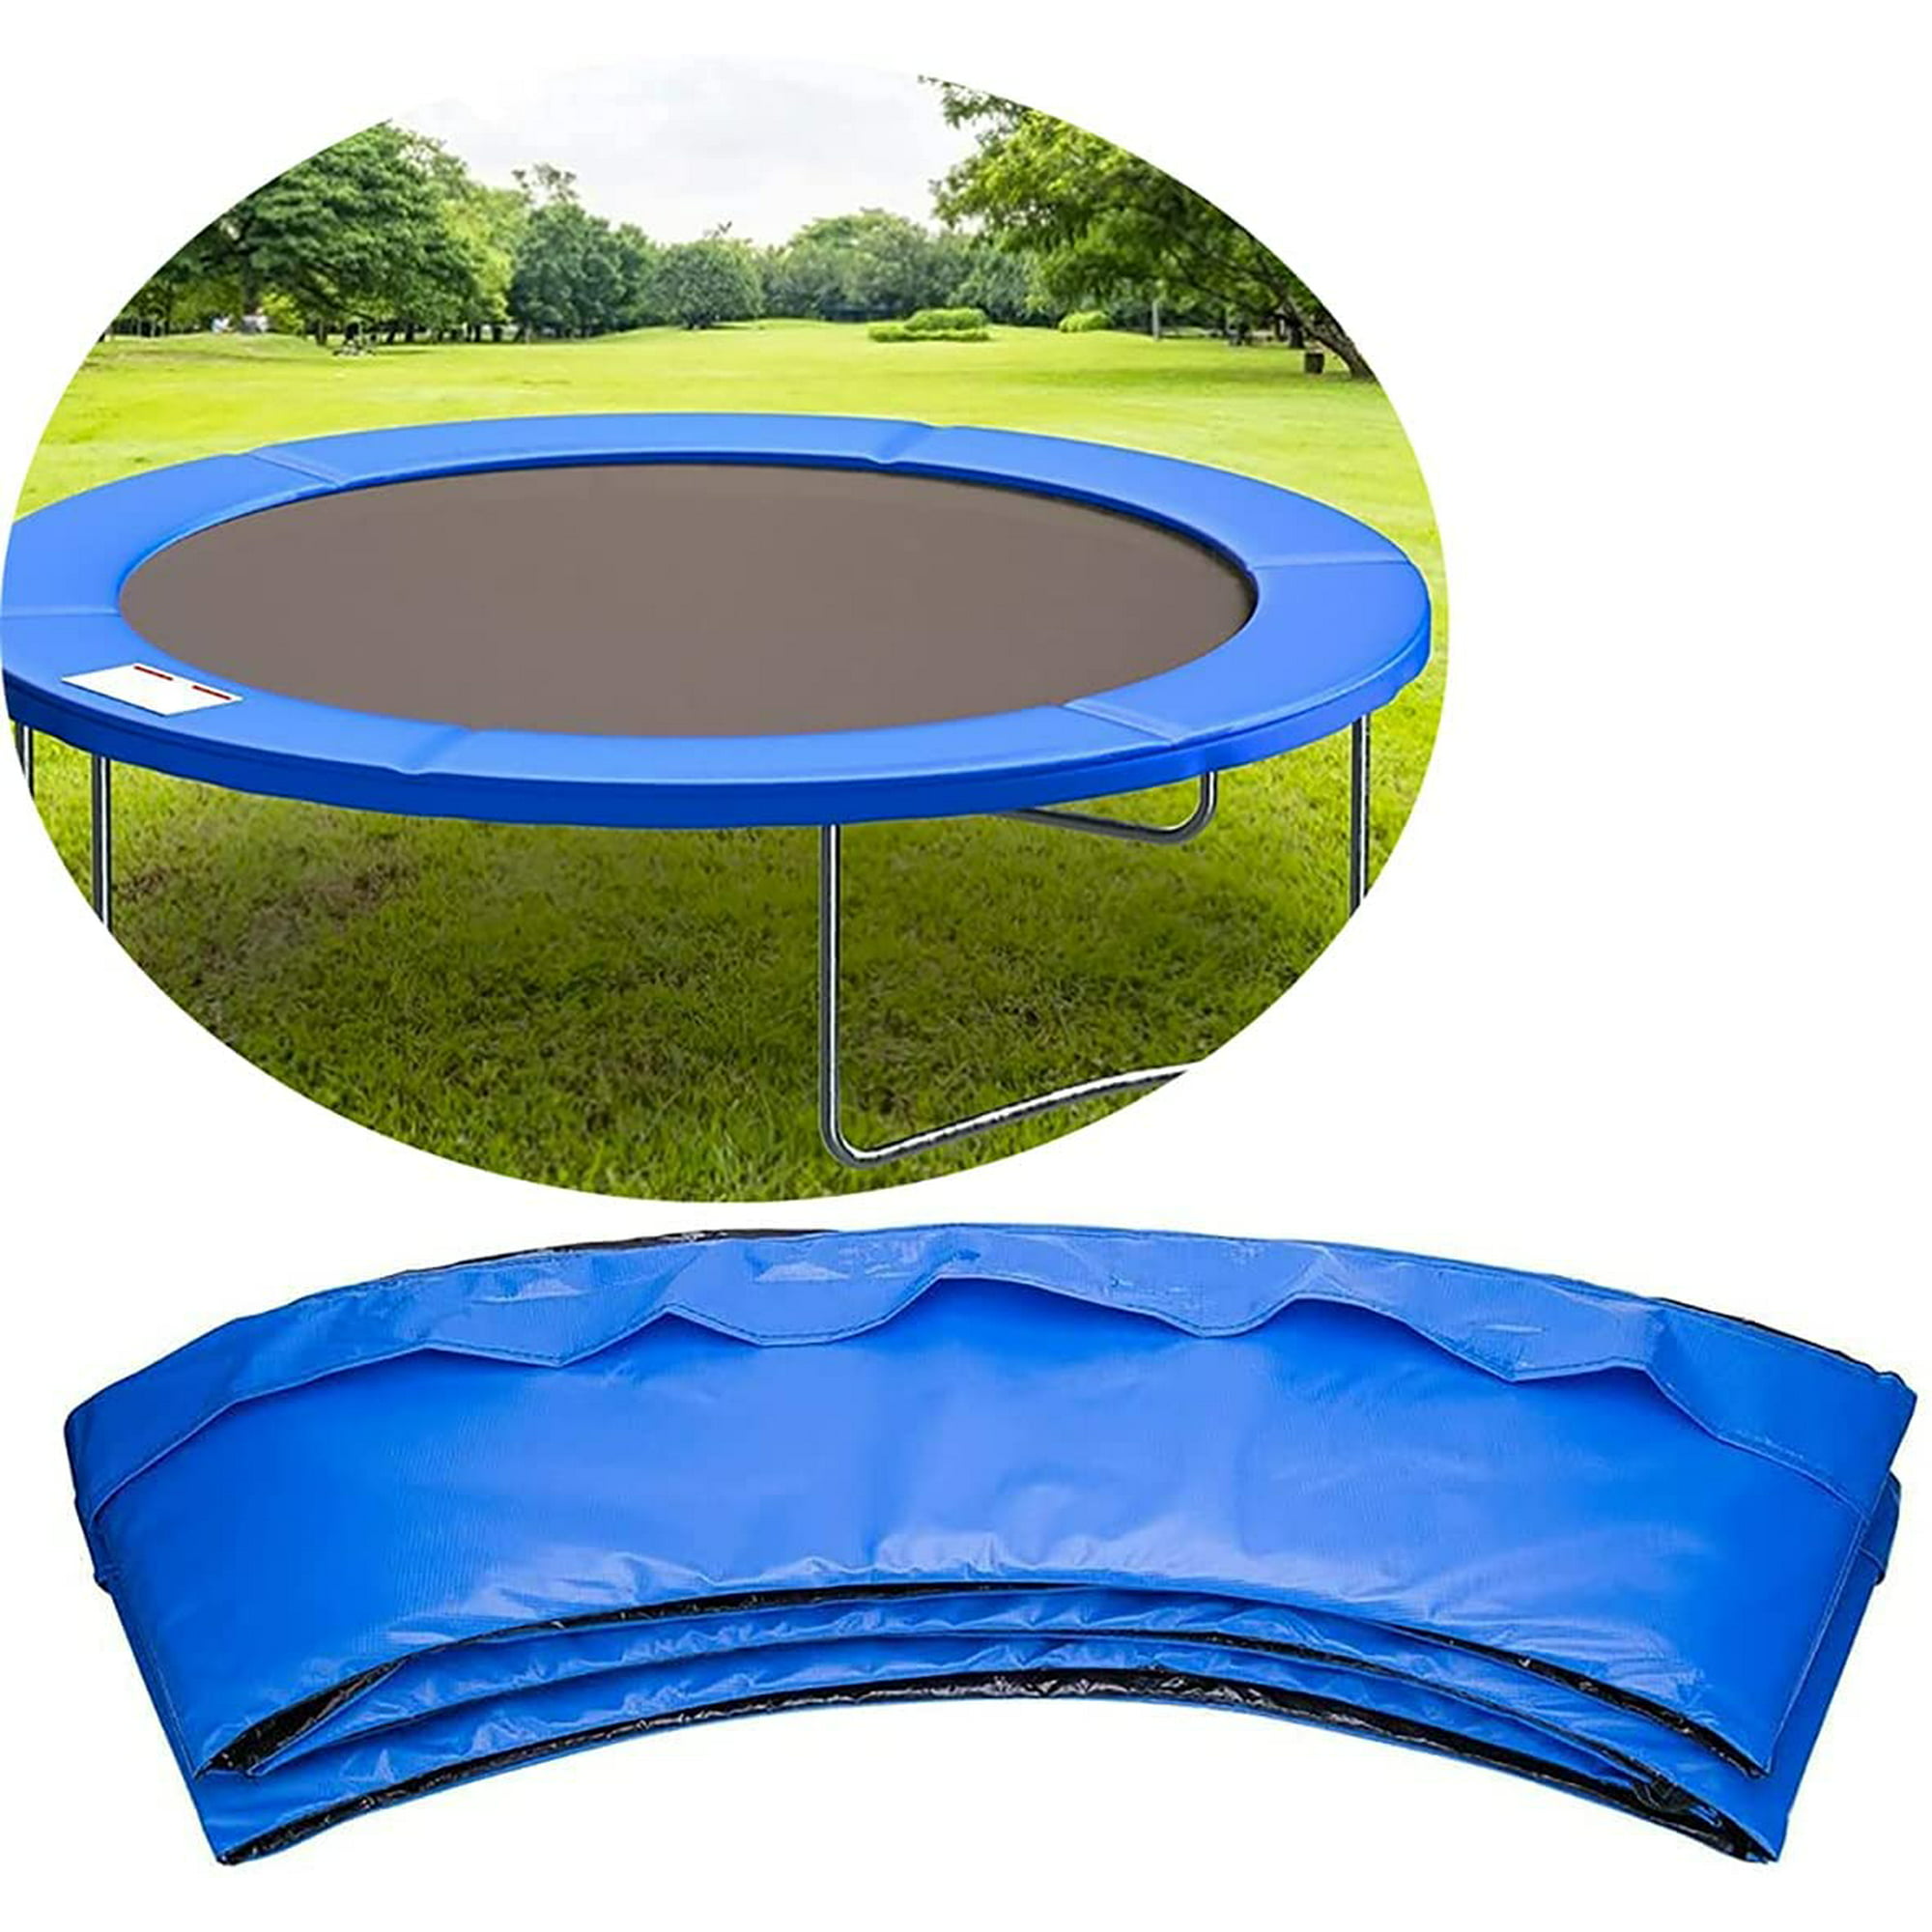 Replacement Trampoline Surround Pad Safety Guard Spring Cover Padding for 6ft 8ft 10ft 12ft 14ft 15ft 16ft | Walmart Canada